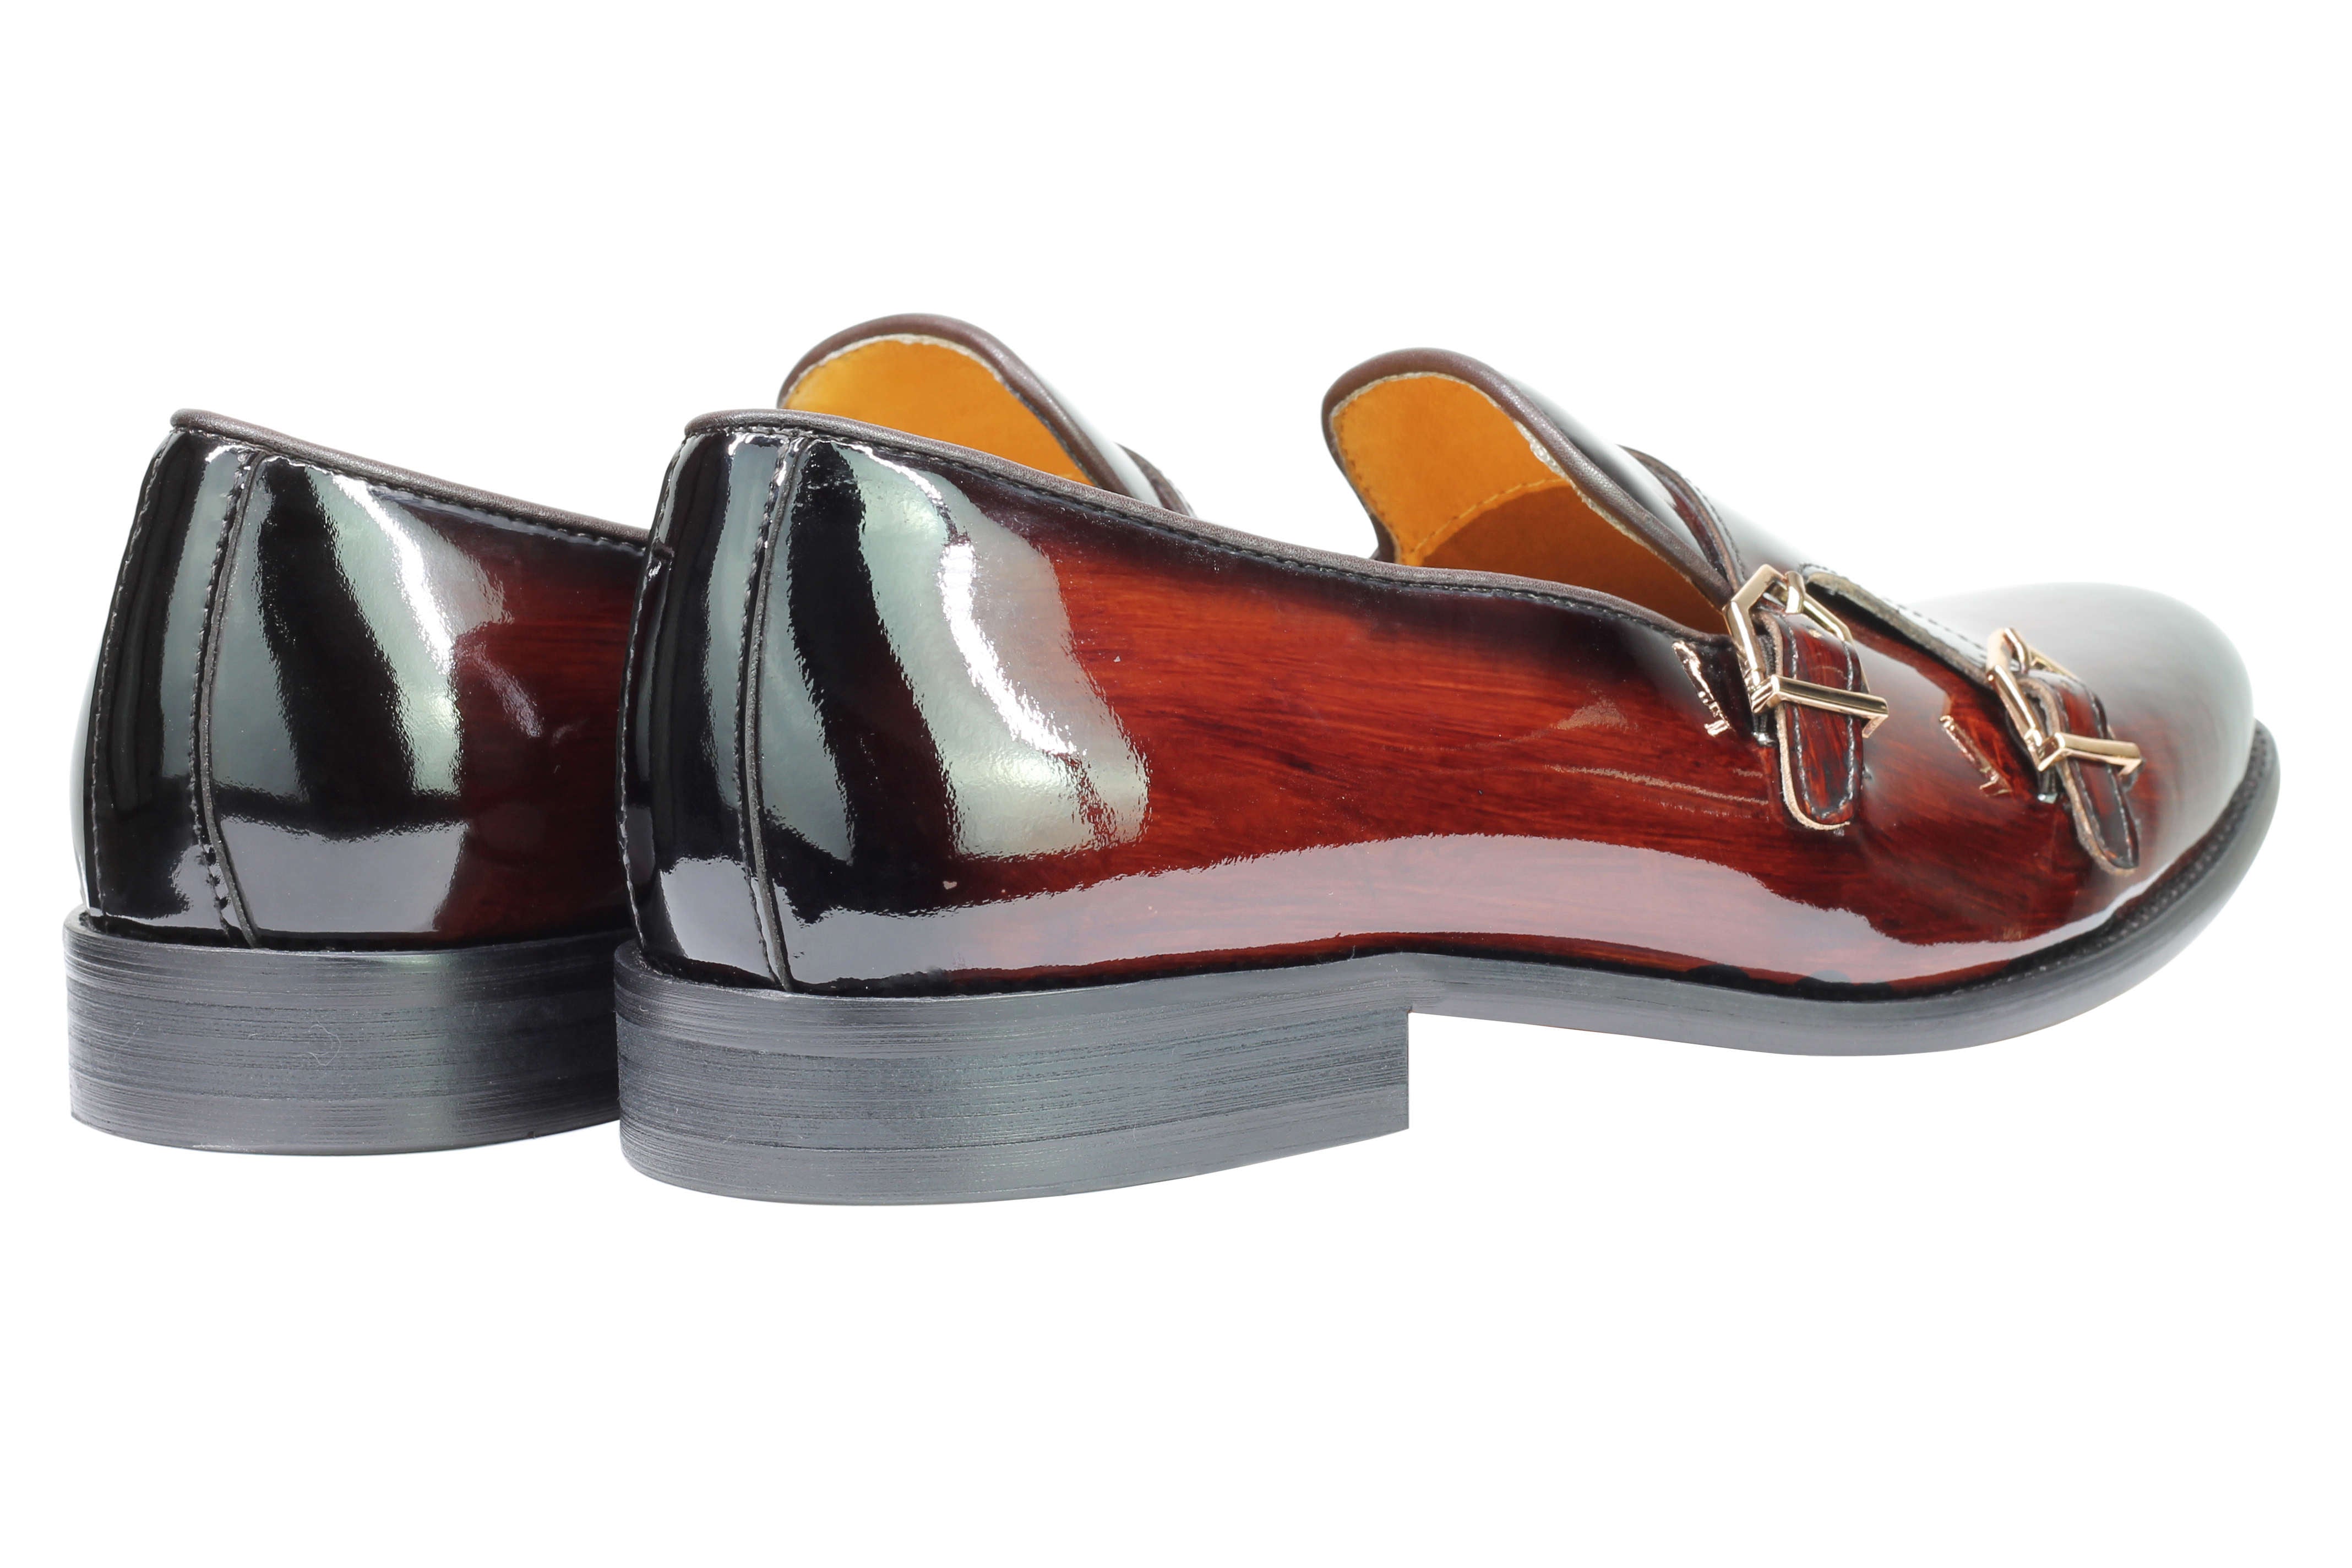 Real Leather Patent Tassel Shiny Loafers